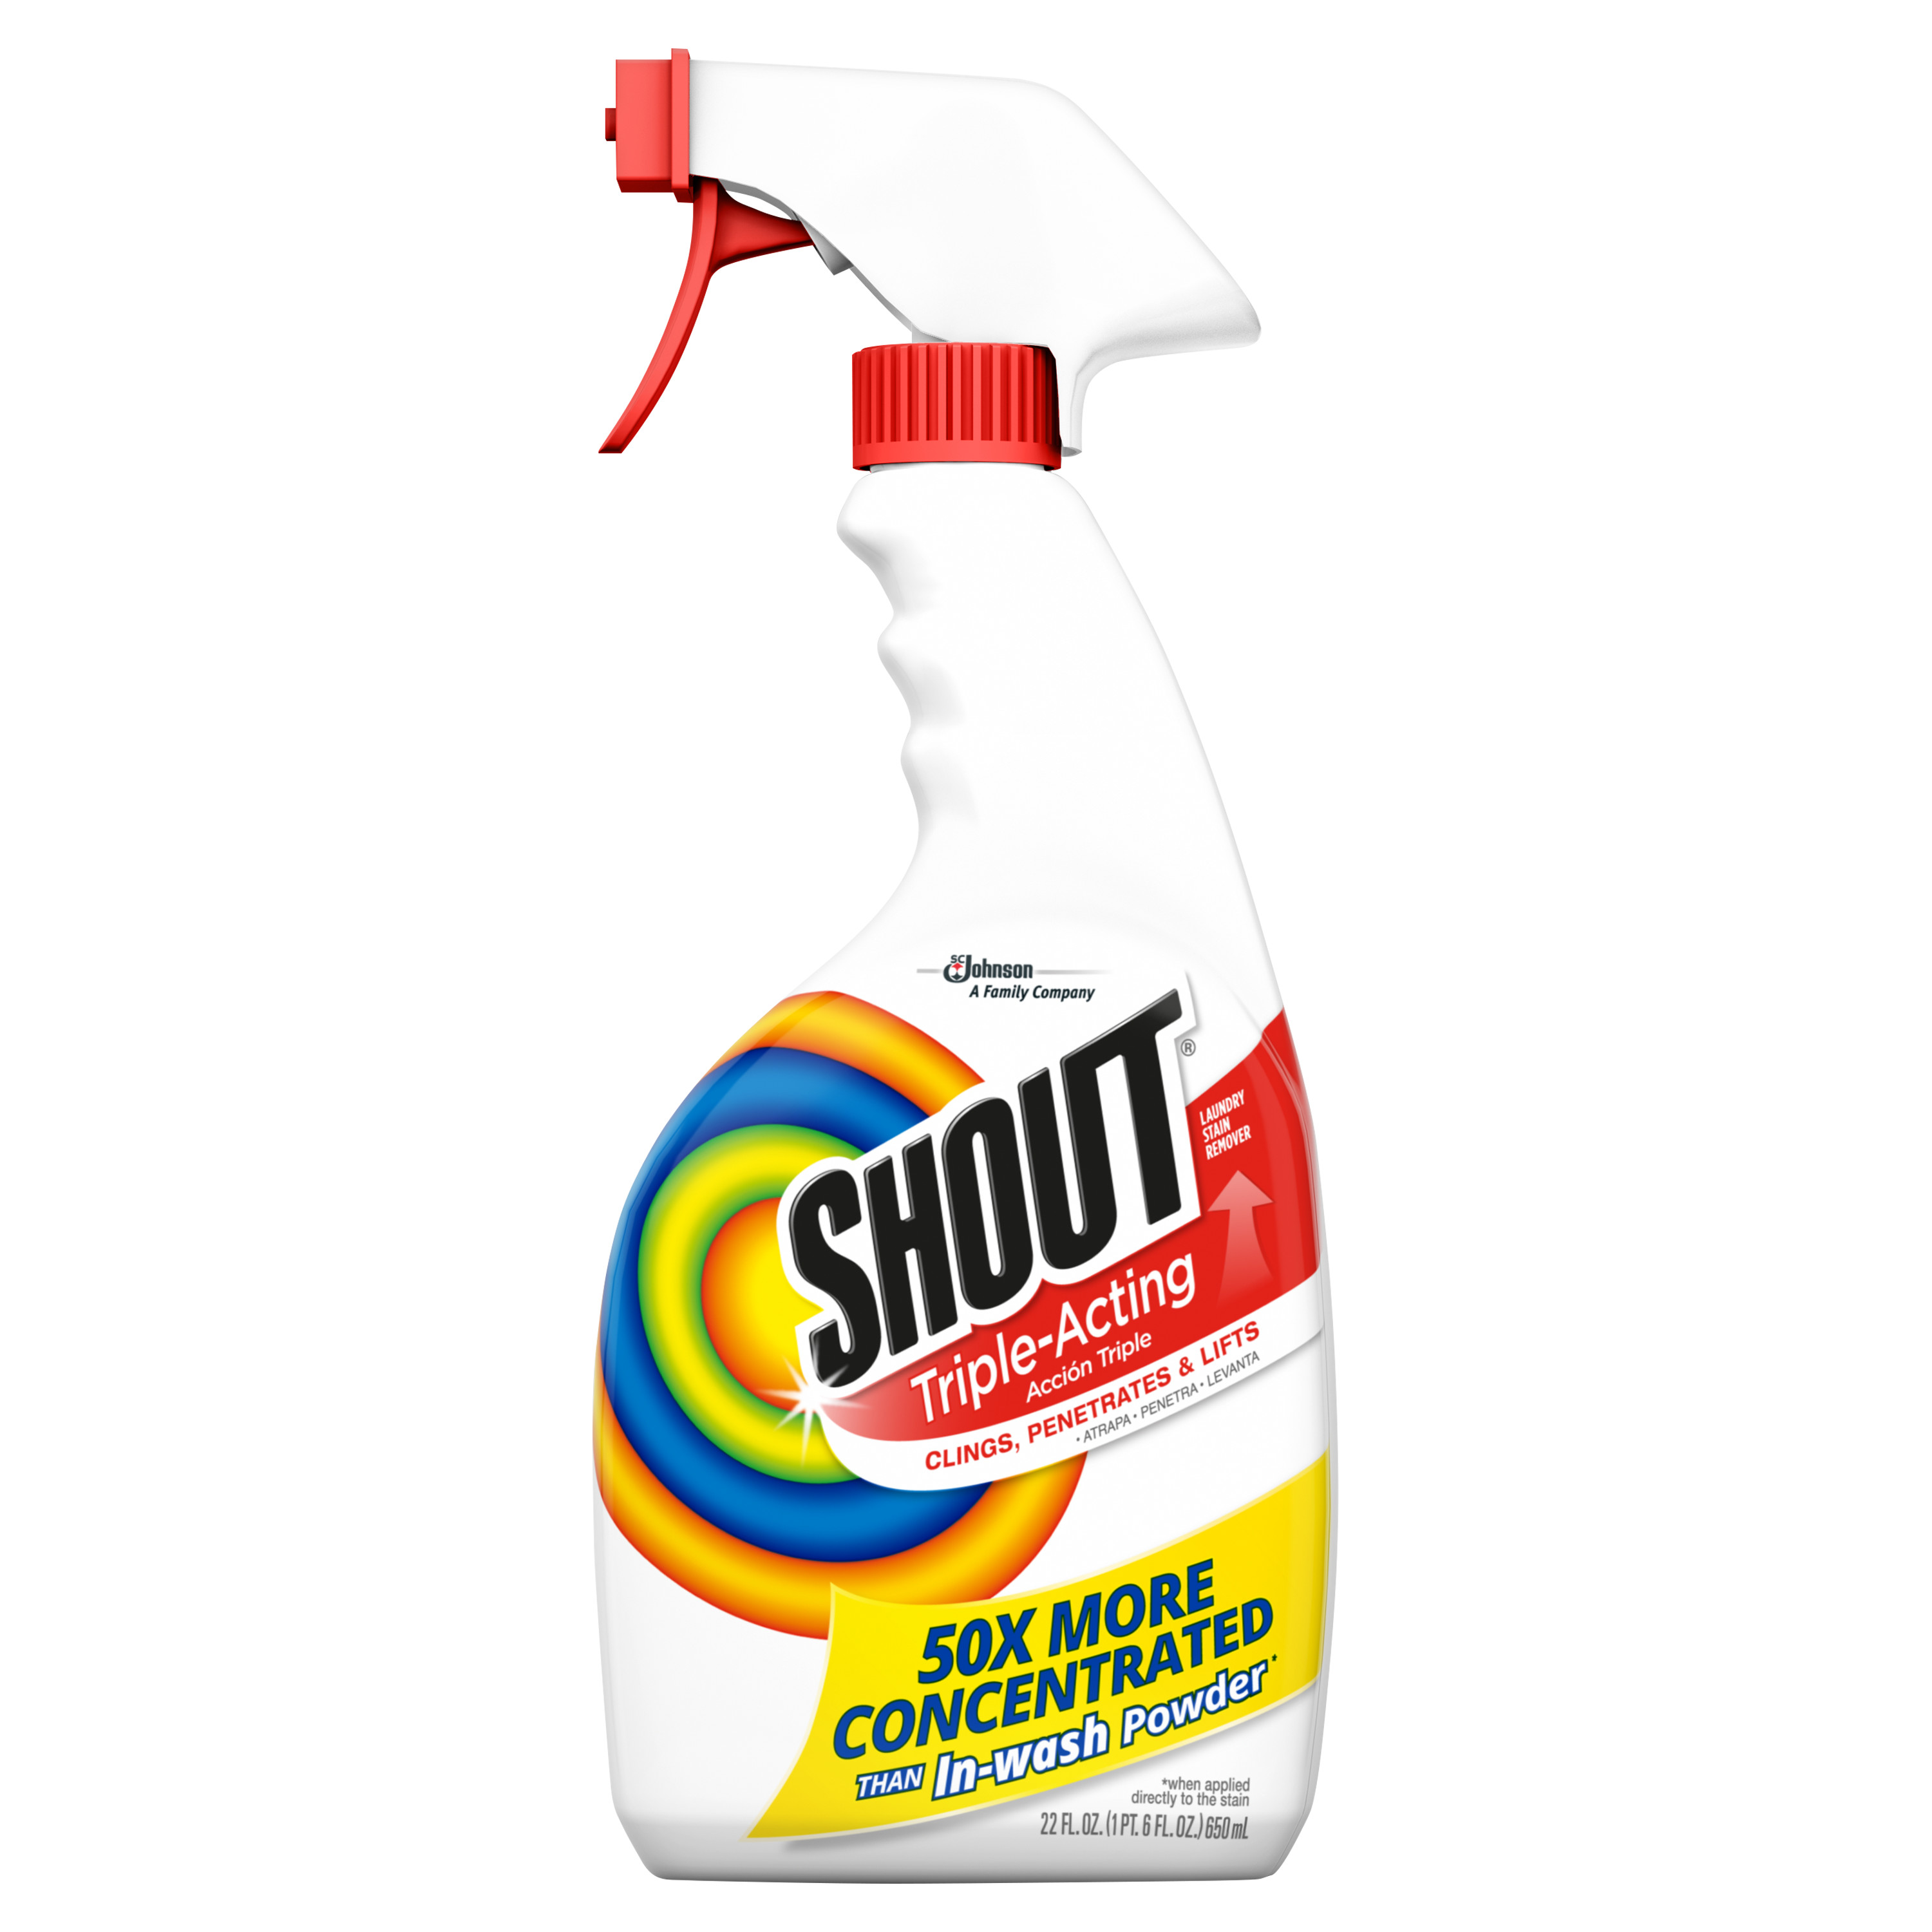 Shout Triple-Acting, Laundry Stain Remover, 22 Ounce - image 9 of 13